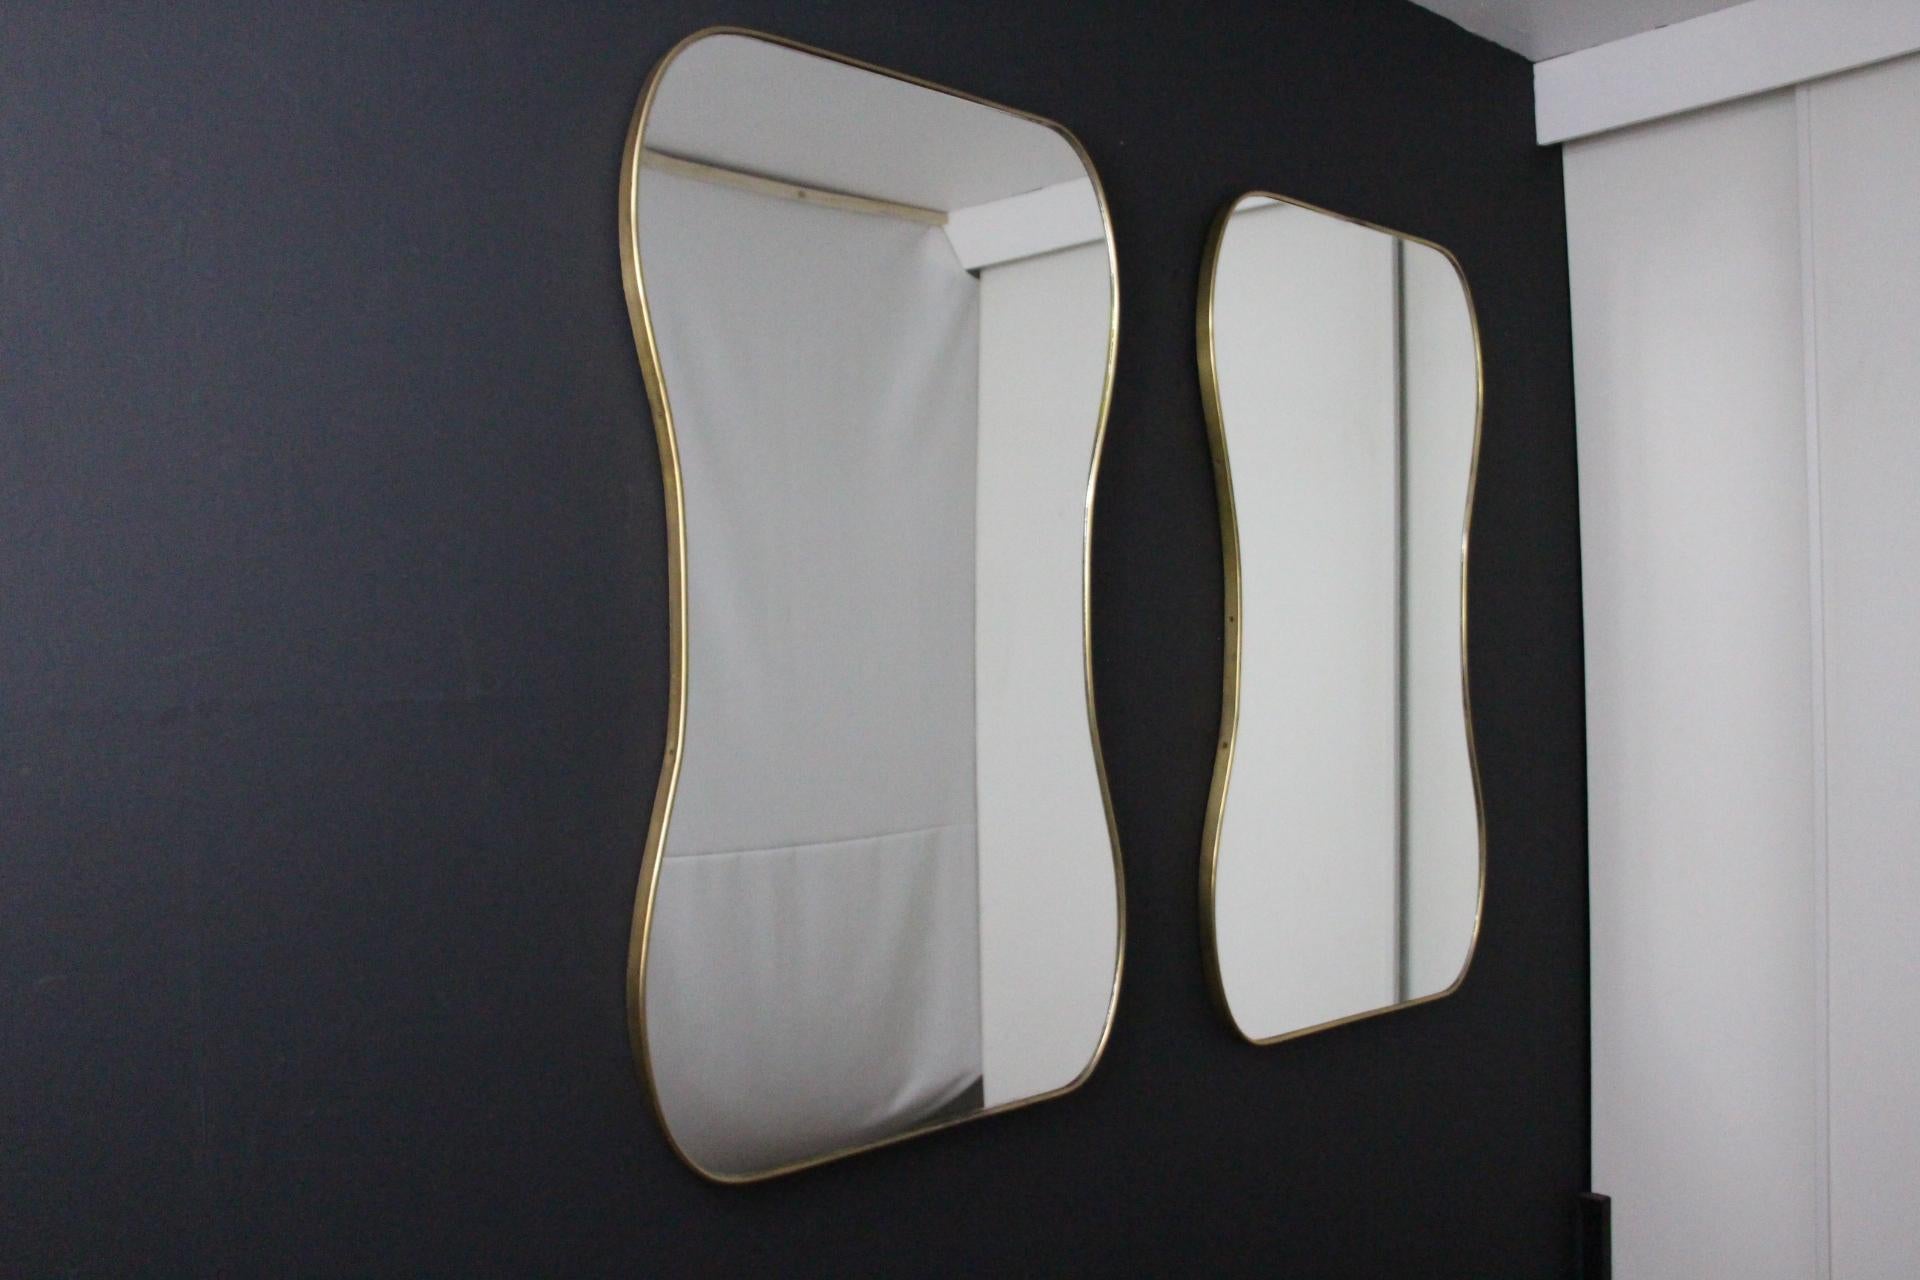 Mid-Century Modern Large 1950's Modernist Shaped Brass Wall Mirror , Gio Ponti Style For Sale